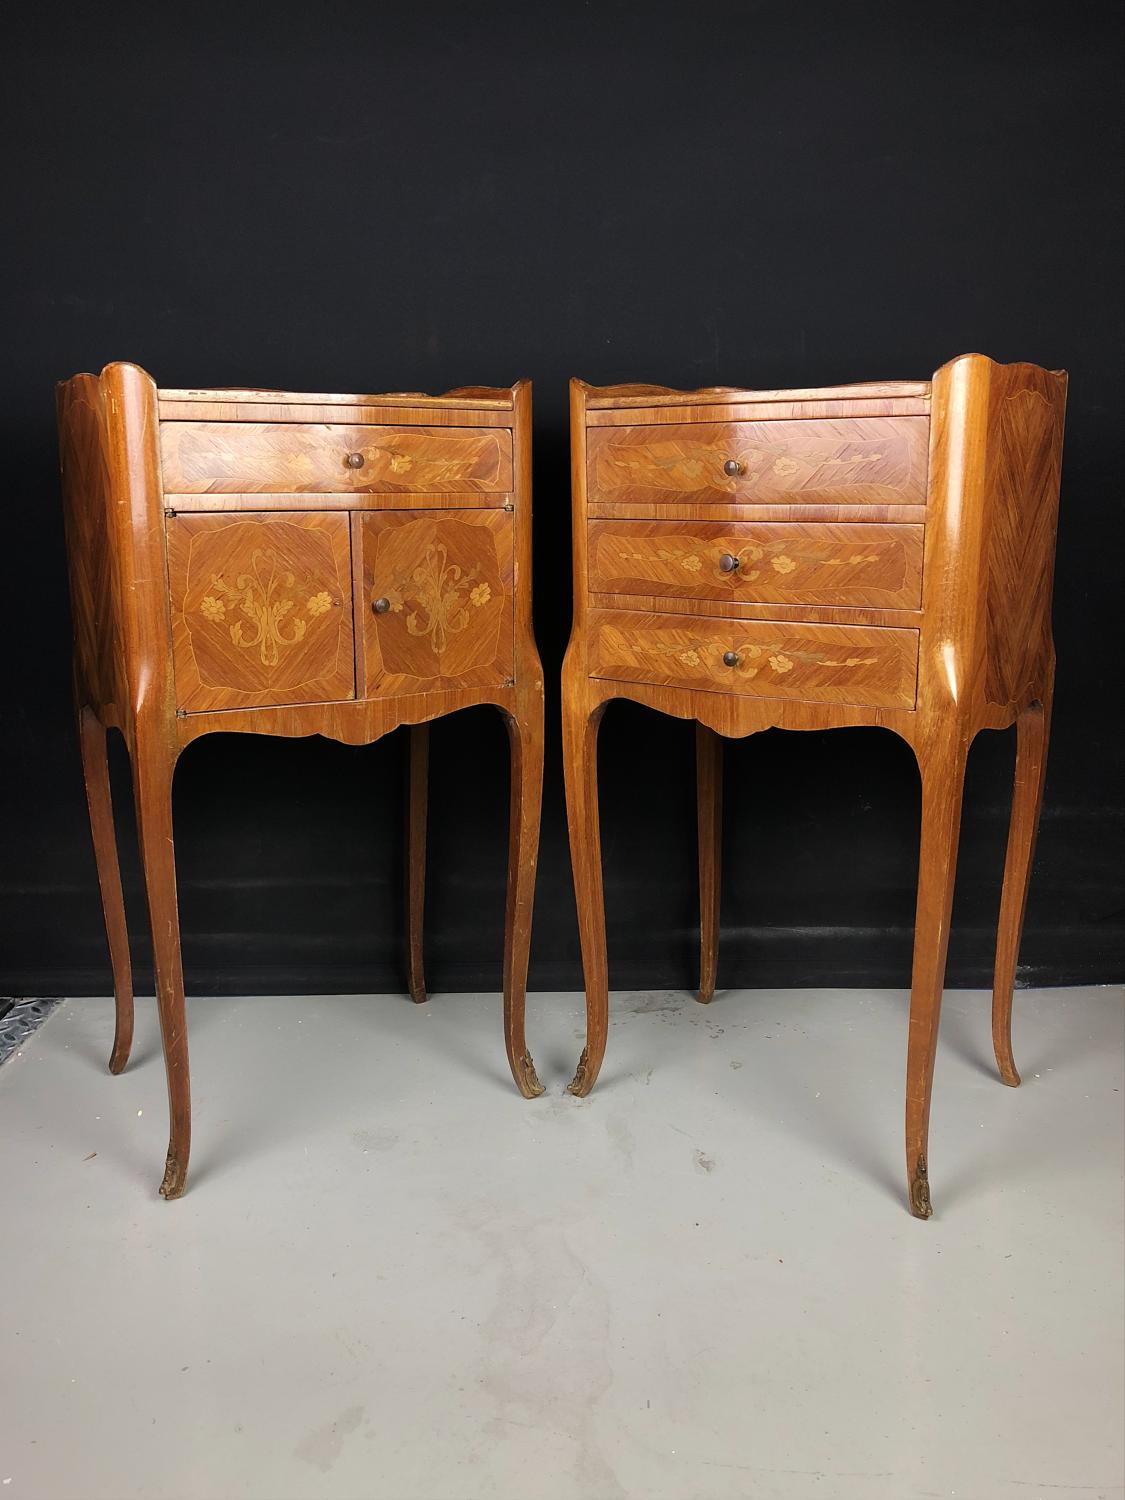 A matched pair of marquetry bedside cabinets